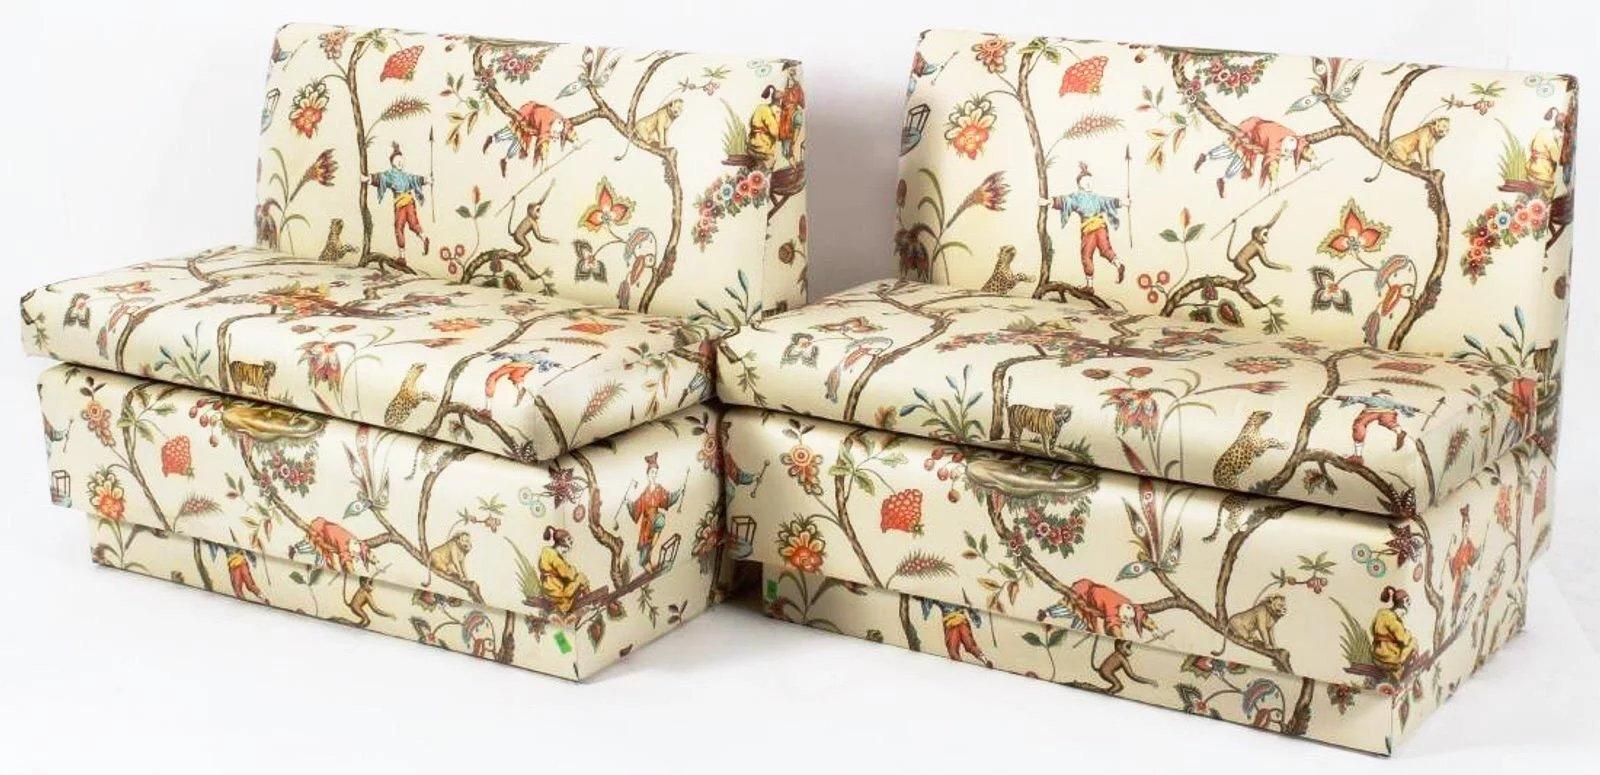 Brunschwig & Fils Vintage Chinoiserie Glazed Cotton Chintz Banquette
Gorgeous custom ordered Chinoiserie Banquette. Cream background features a gently ordered pattern featuring acrobats, tigers, monkeys, elephants and stylized foliage, blossoms and